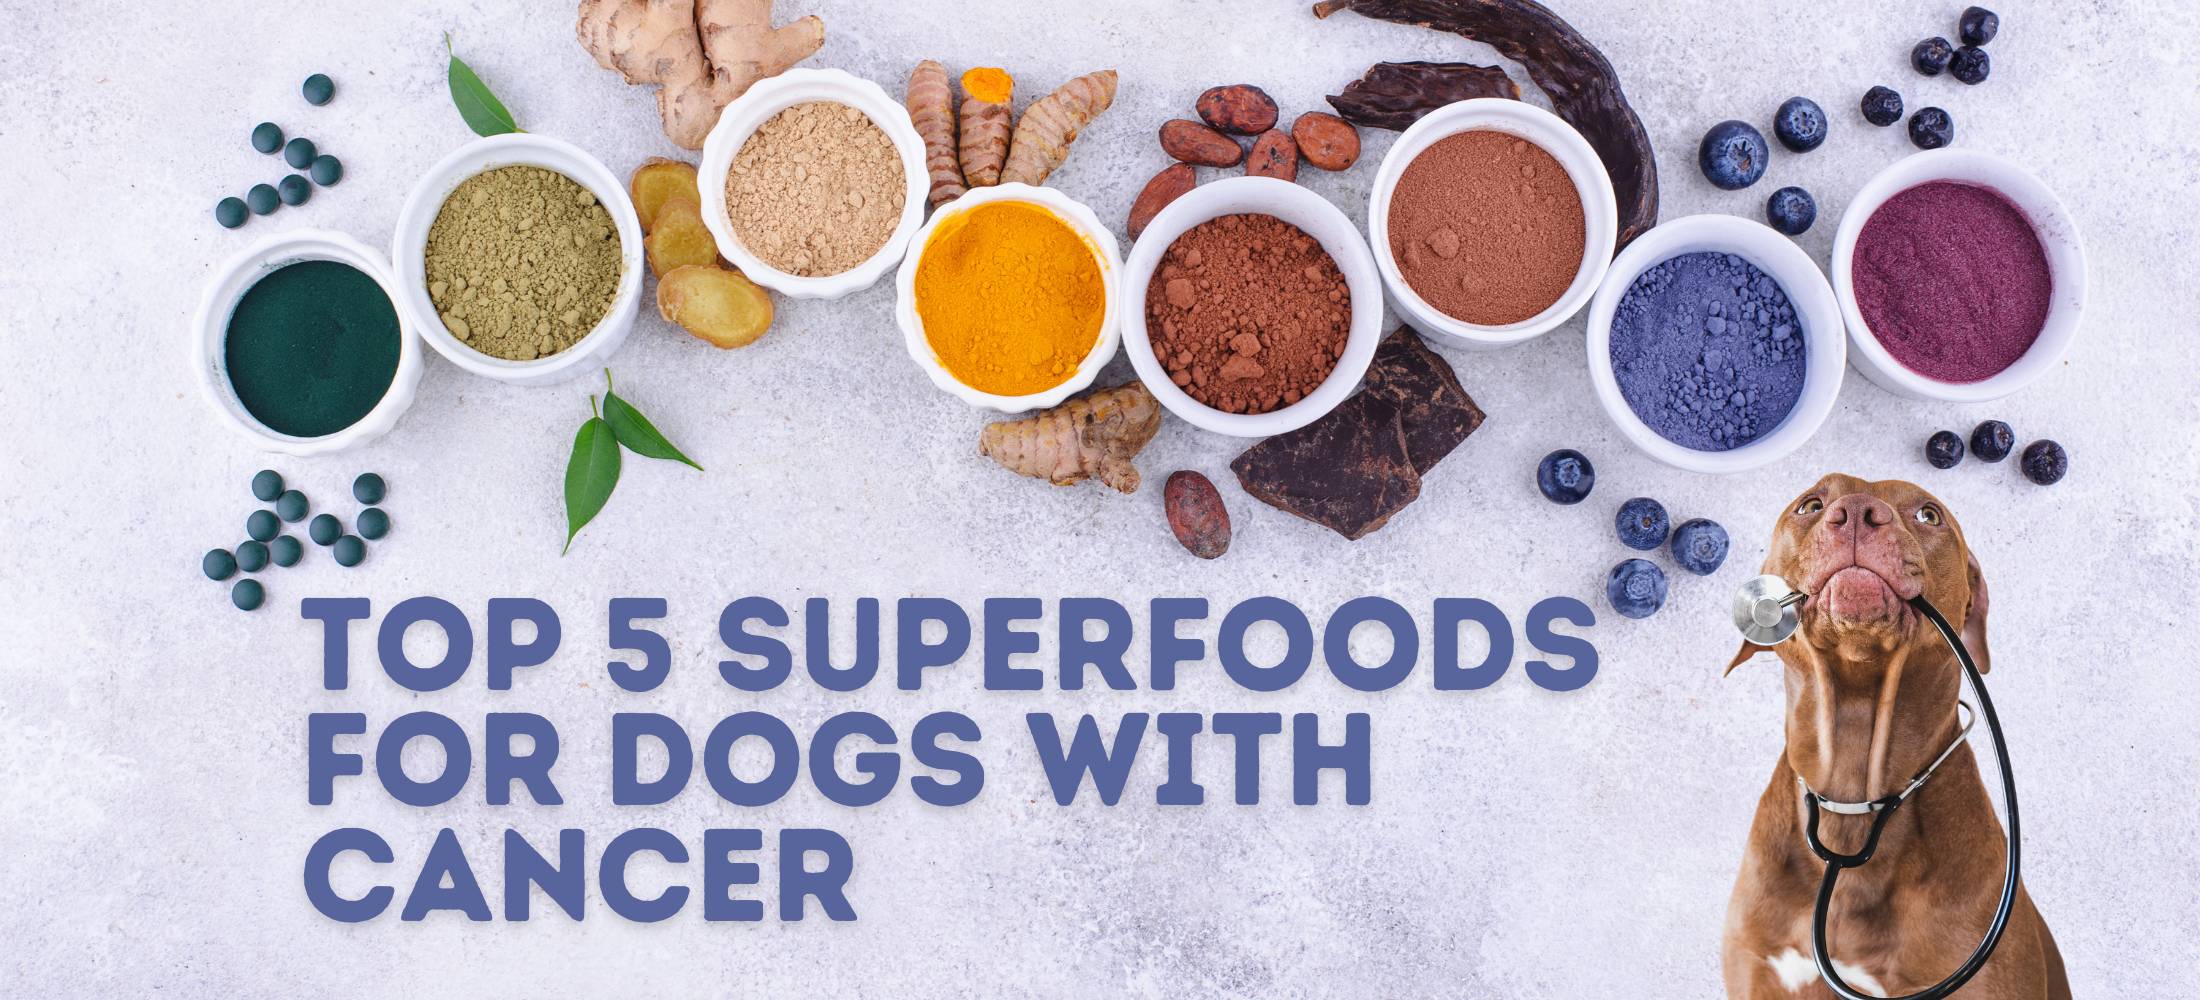 Top 5 Superfoods For Dogs With Cancer